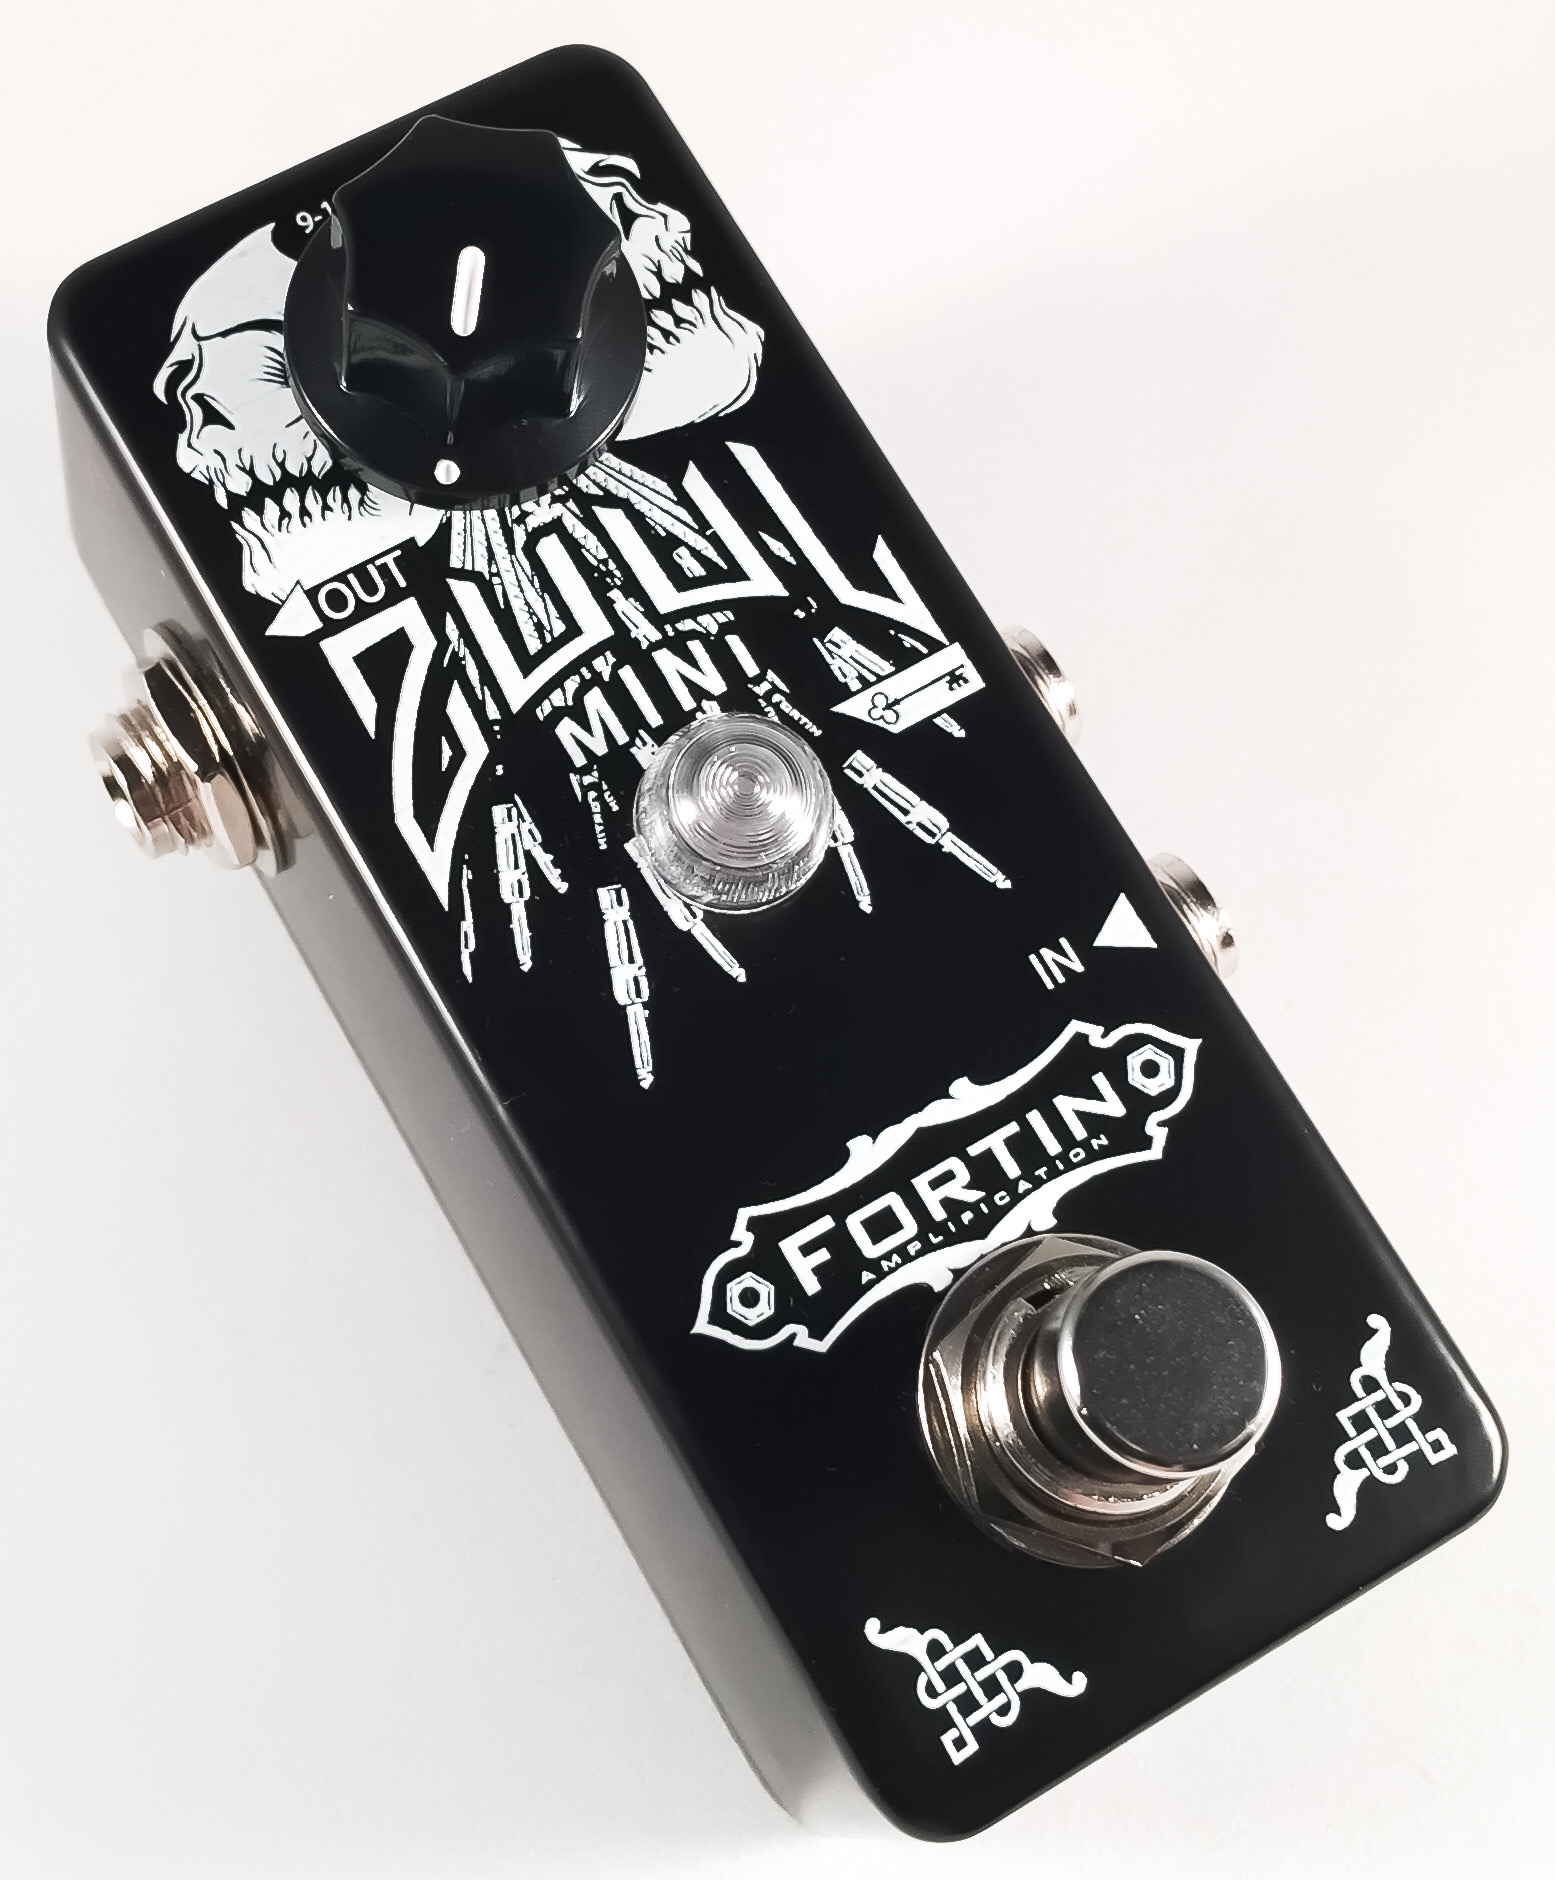 Fortin Amps Mini Zuul Noise Gate - Pedal compresor / sustain / noise gate - Variation 1